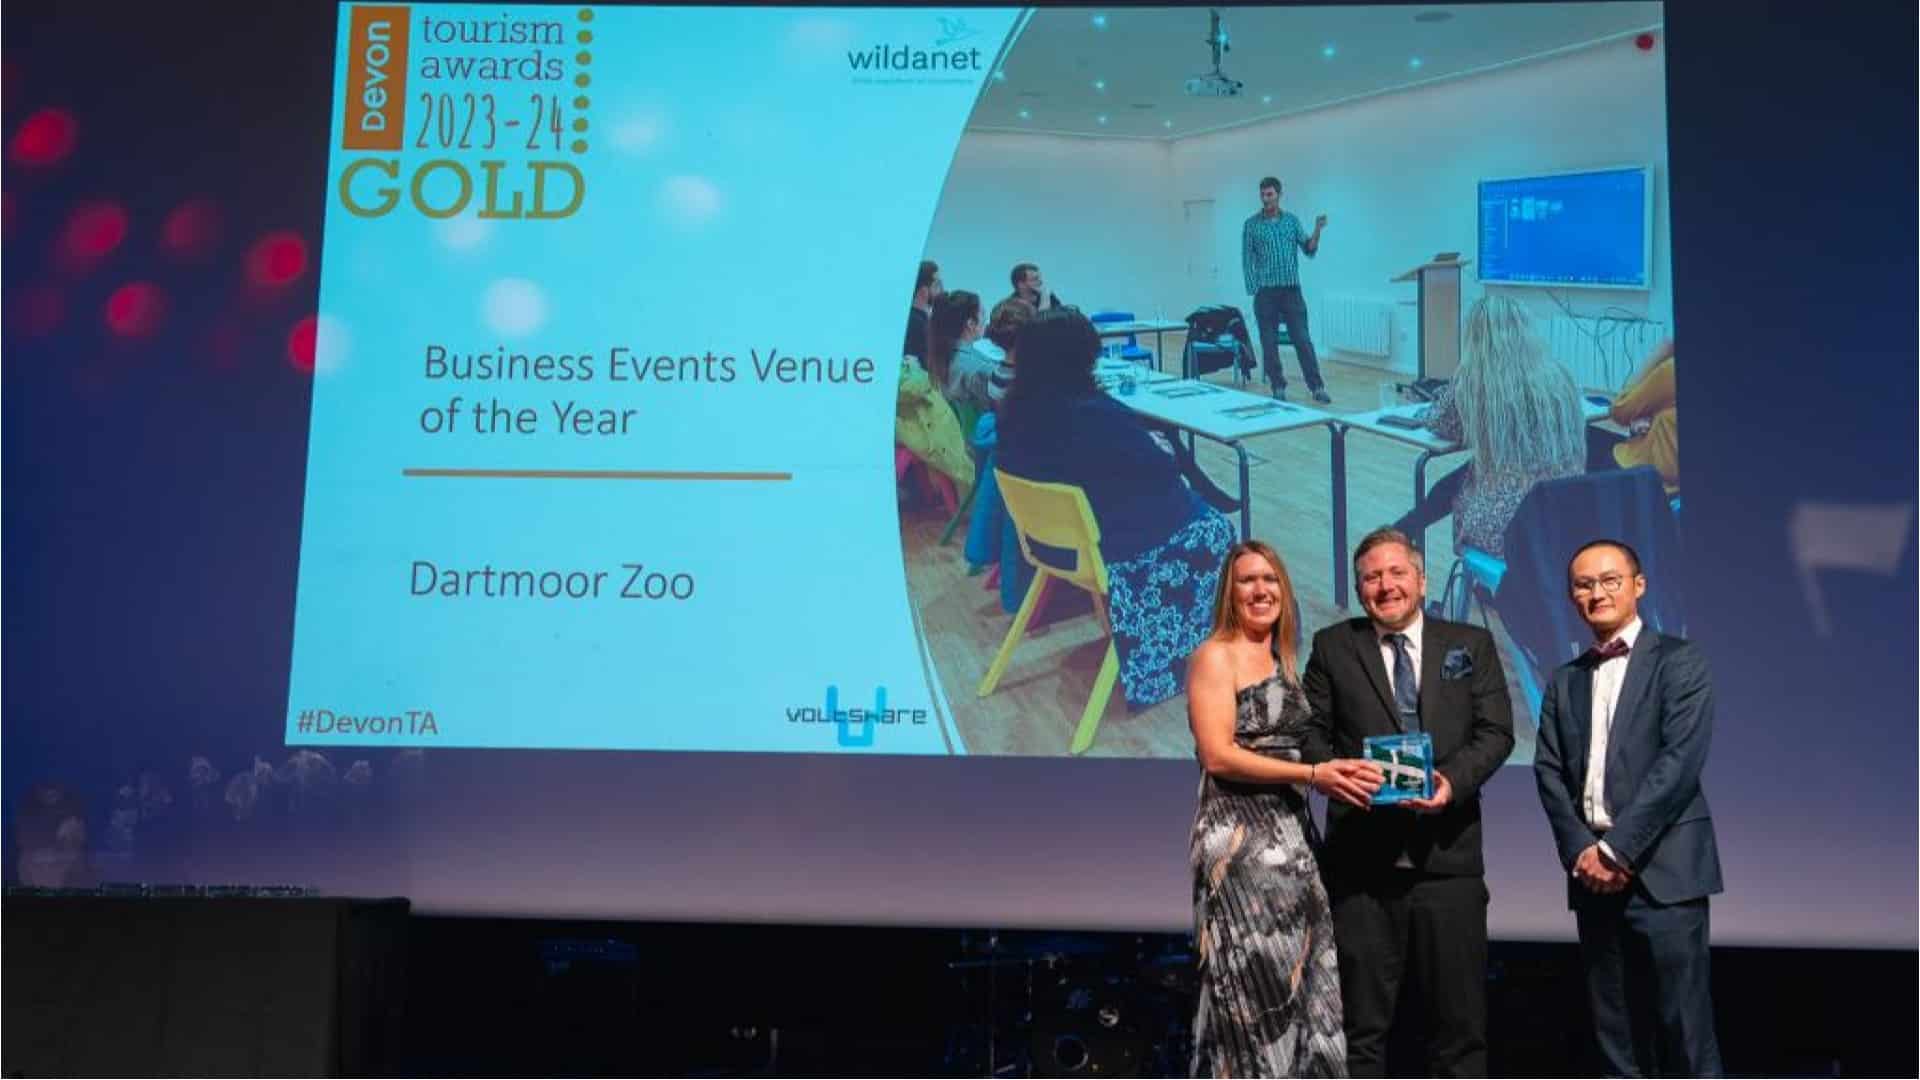 Gold Award for Business Events Venue of the Year